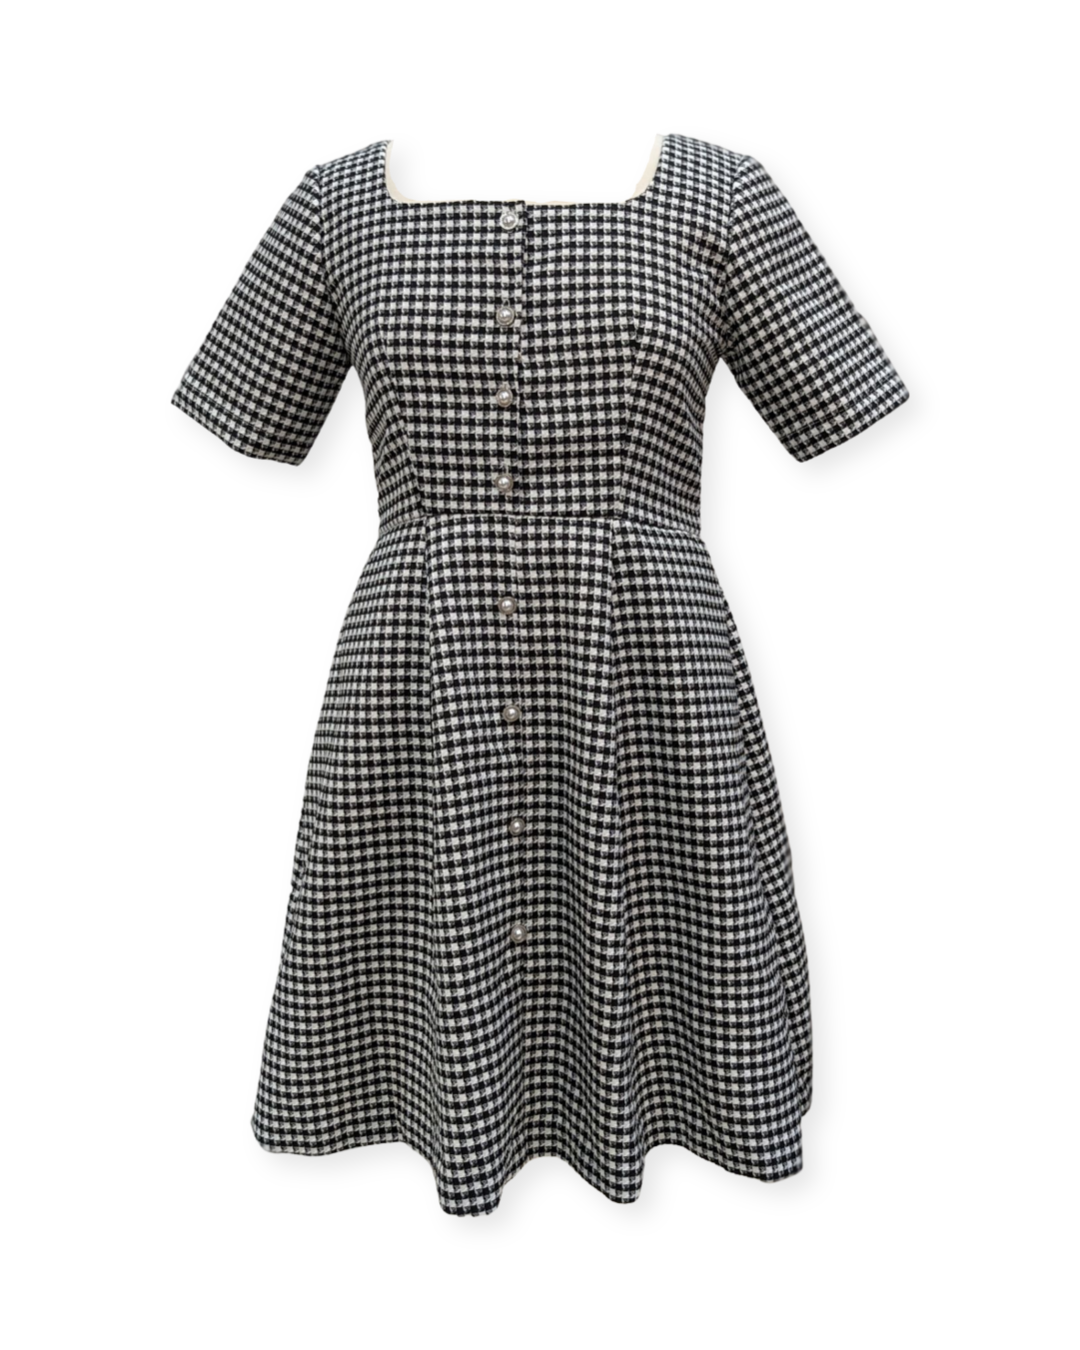 Lana Short Sleeves Tweed Dress in Black Houndstooth (Ready-to-ship)